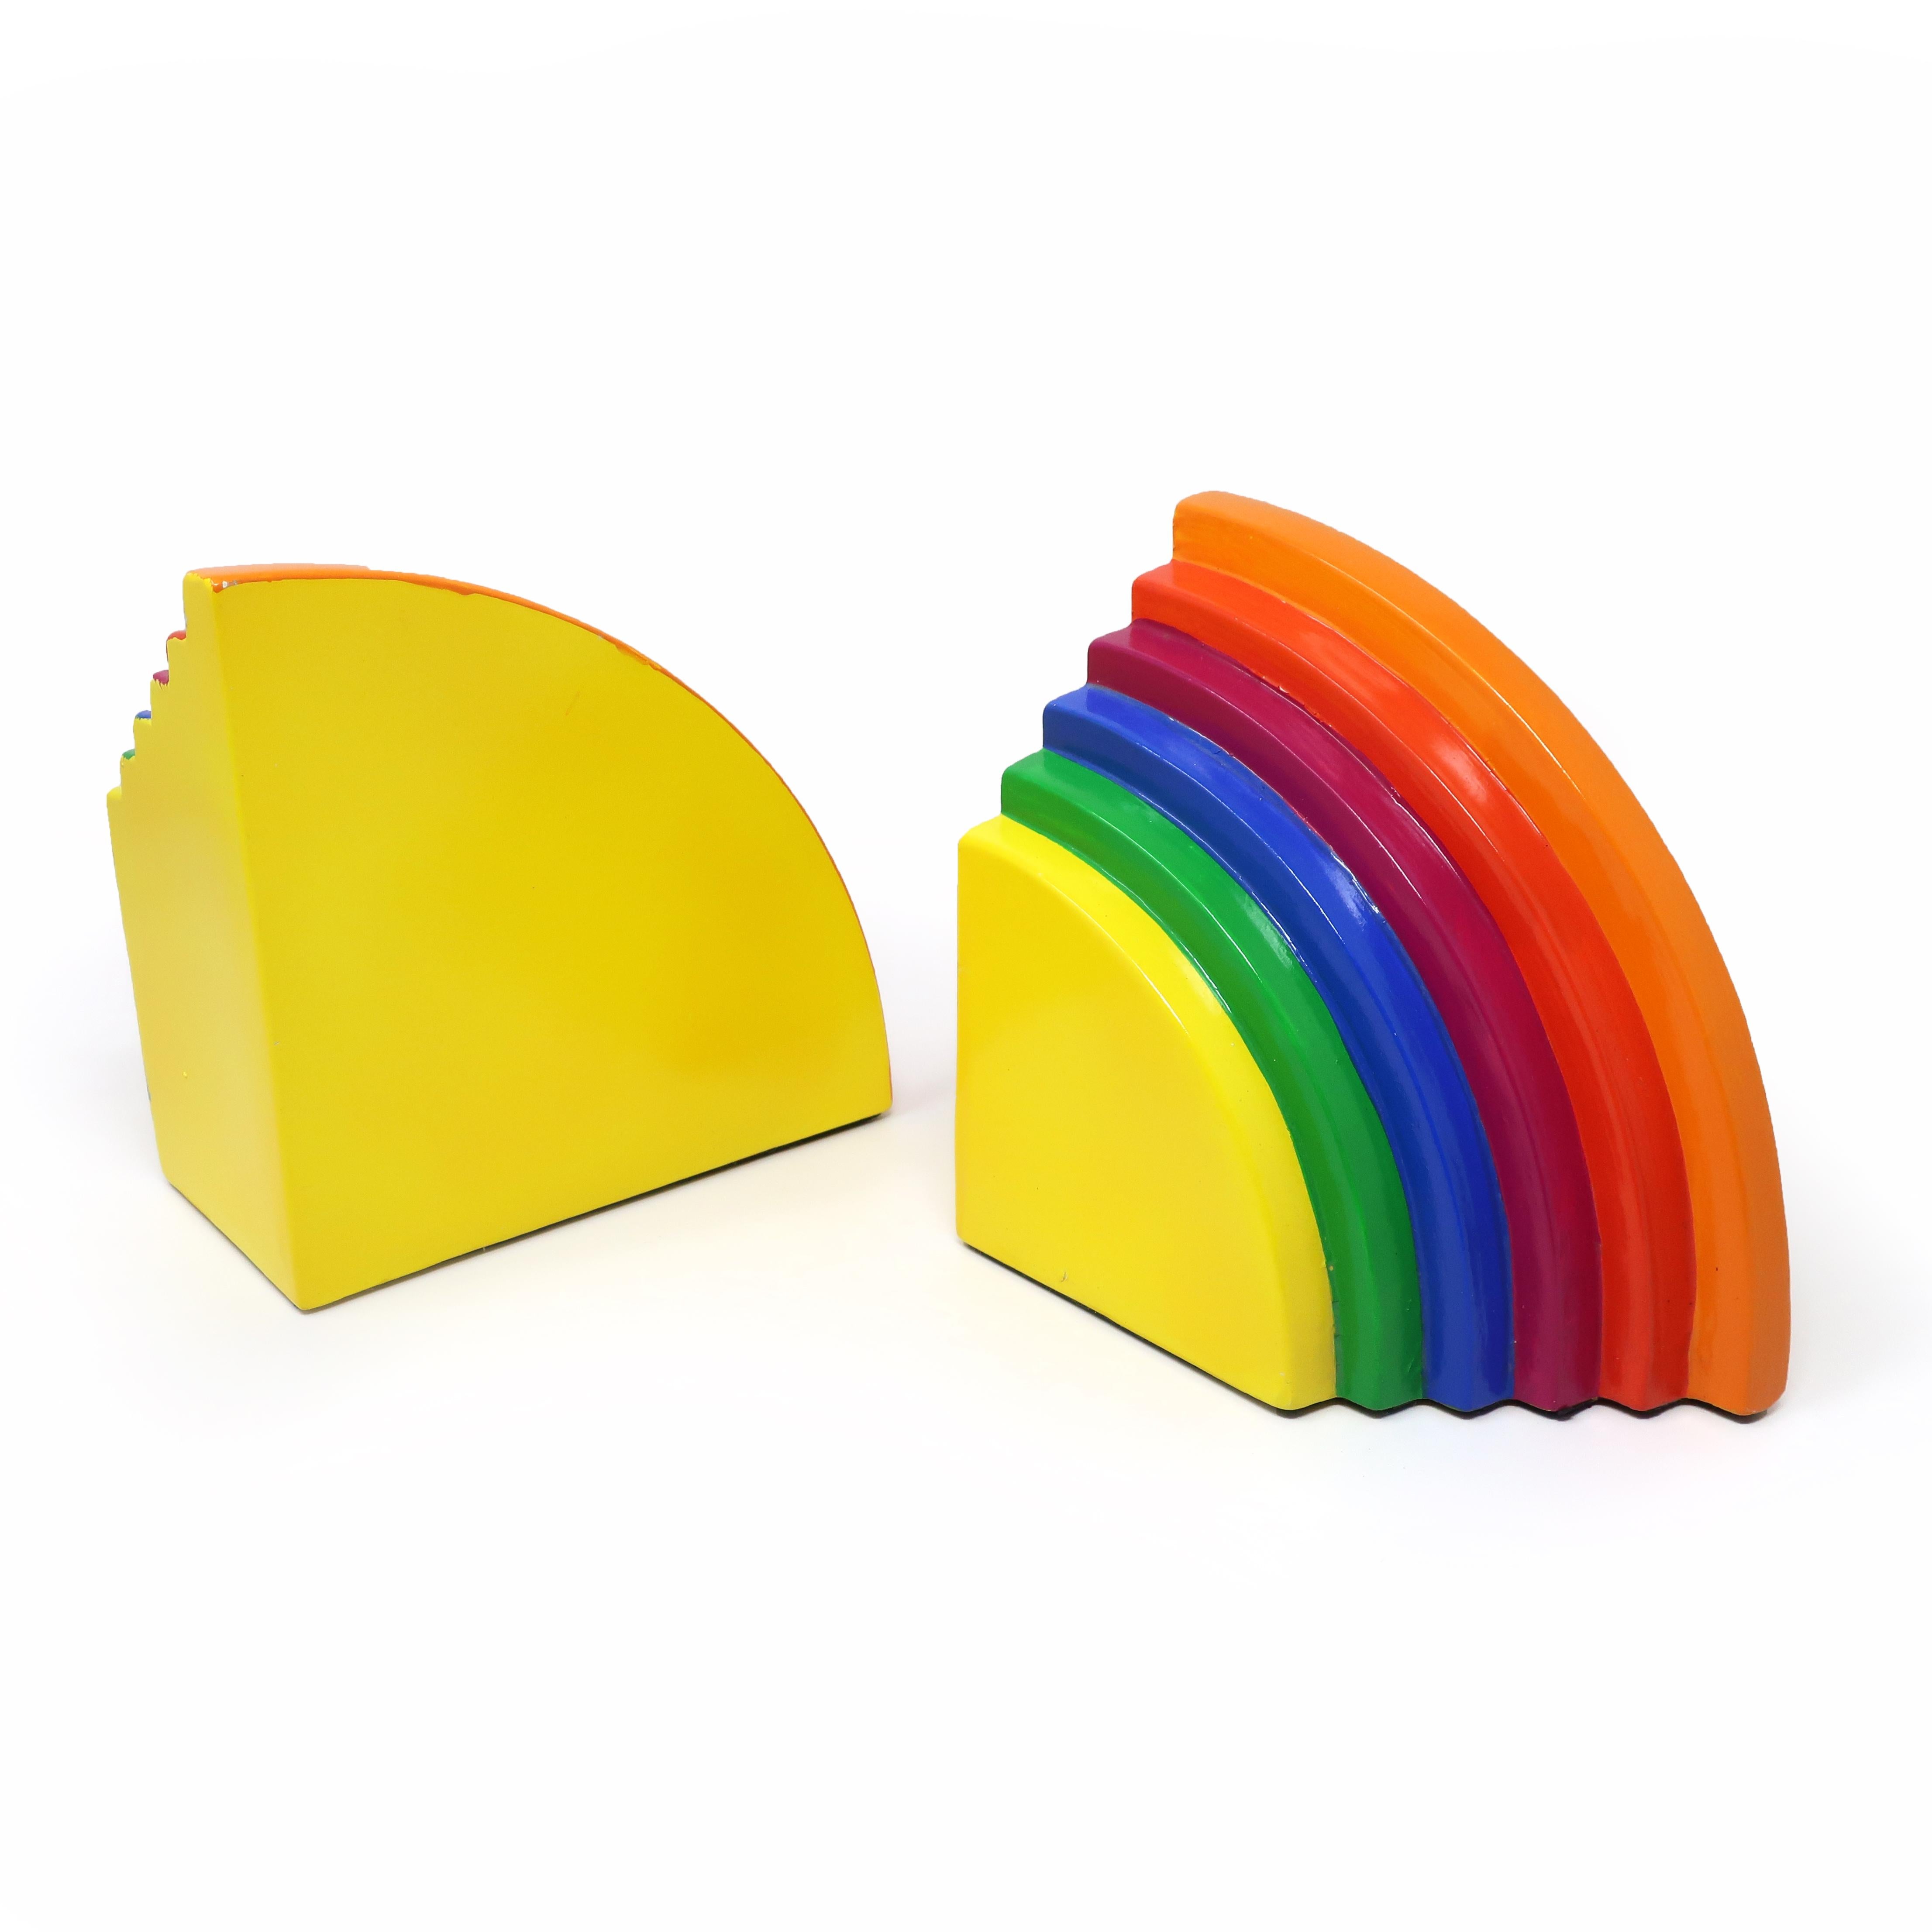 1980 Hand Painted Ceramic Rainbow Bookends by Fitz and Floyd 2